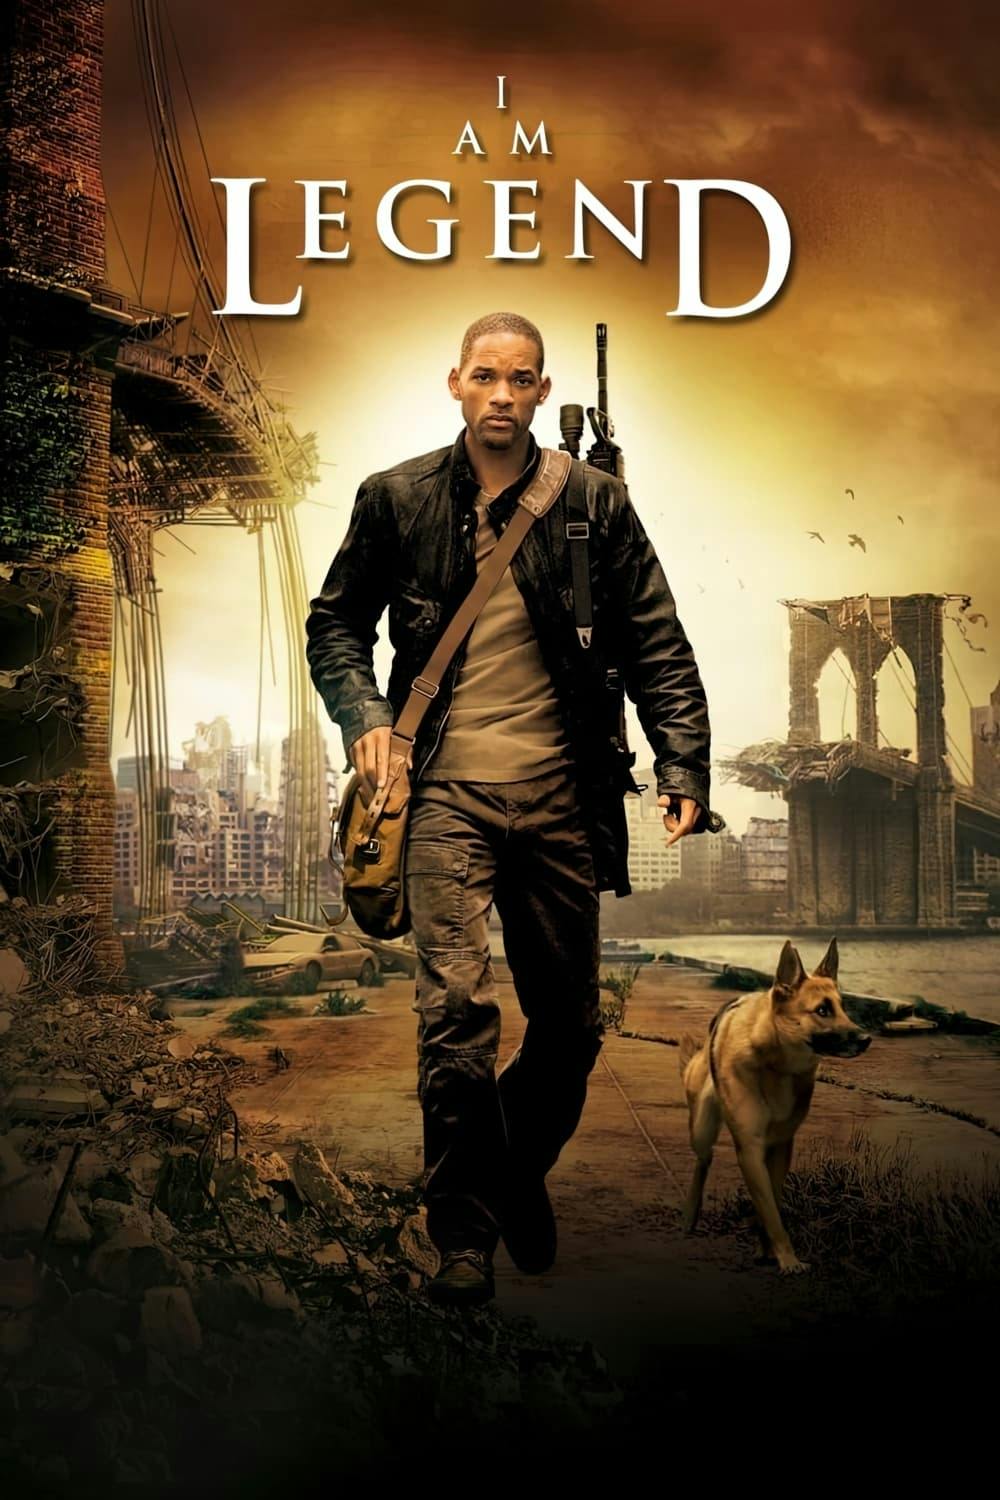 Best Will Smith movies to watch on Amazon or iTunes